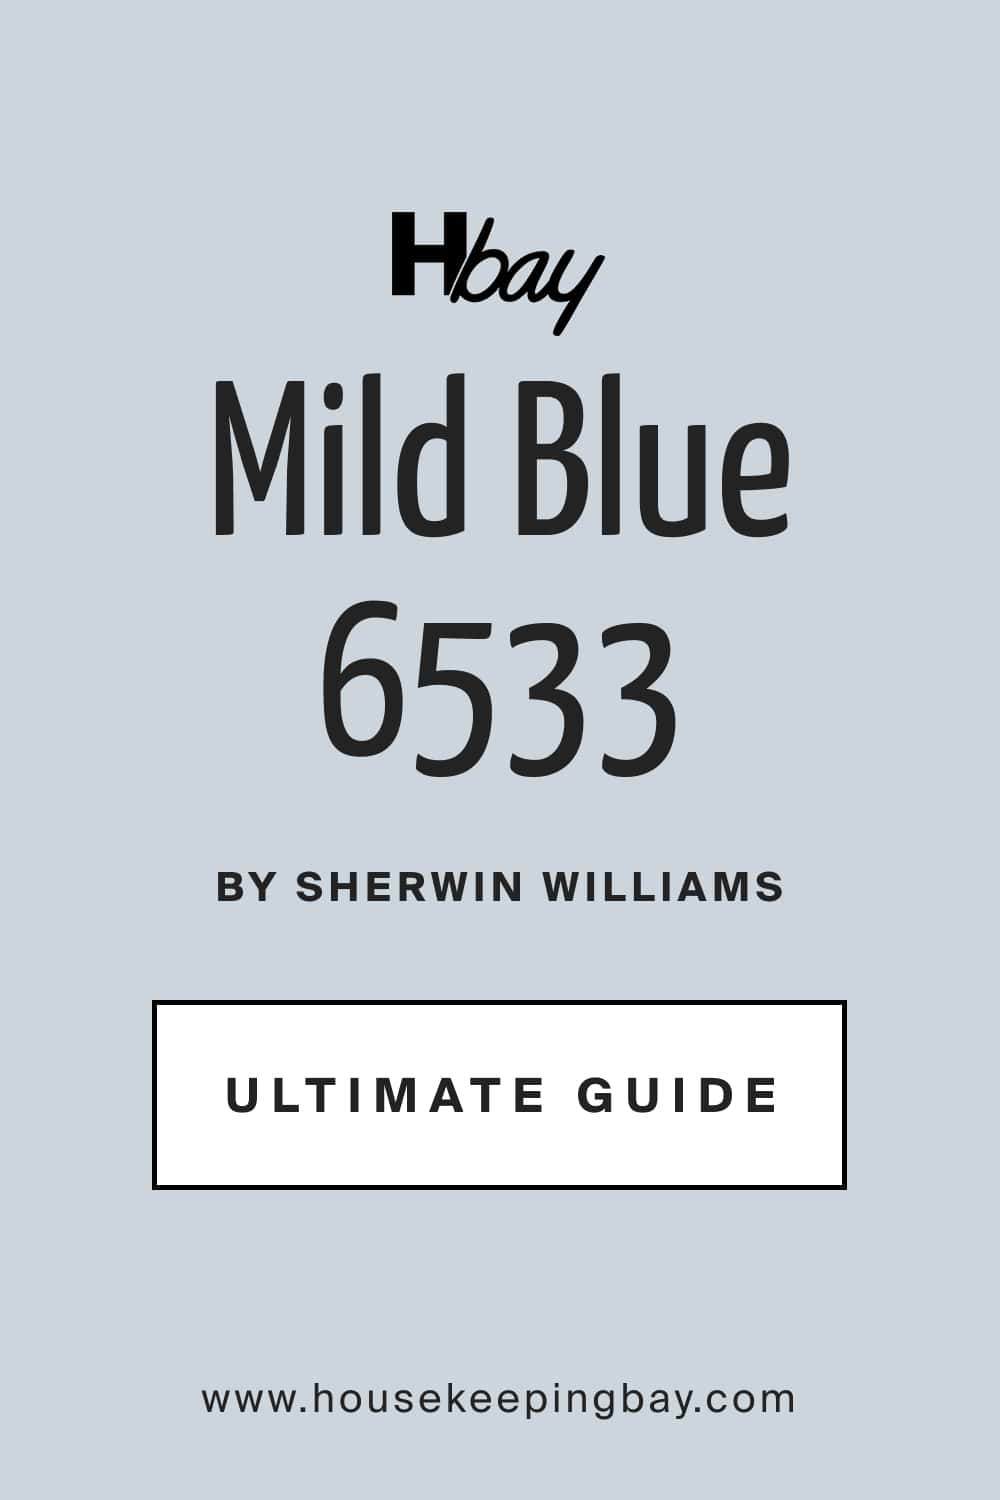 Mild Blue SW 6533 by Sherwin Williams Ultimate Guide